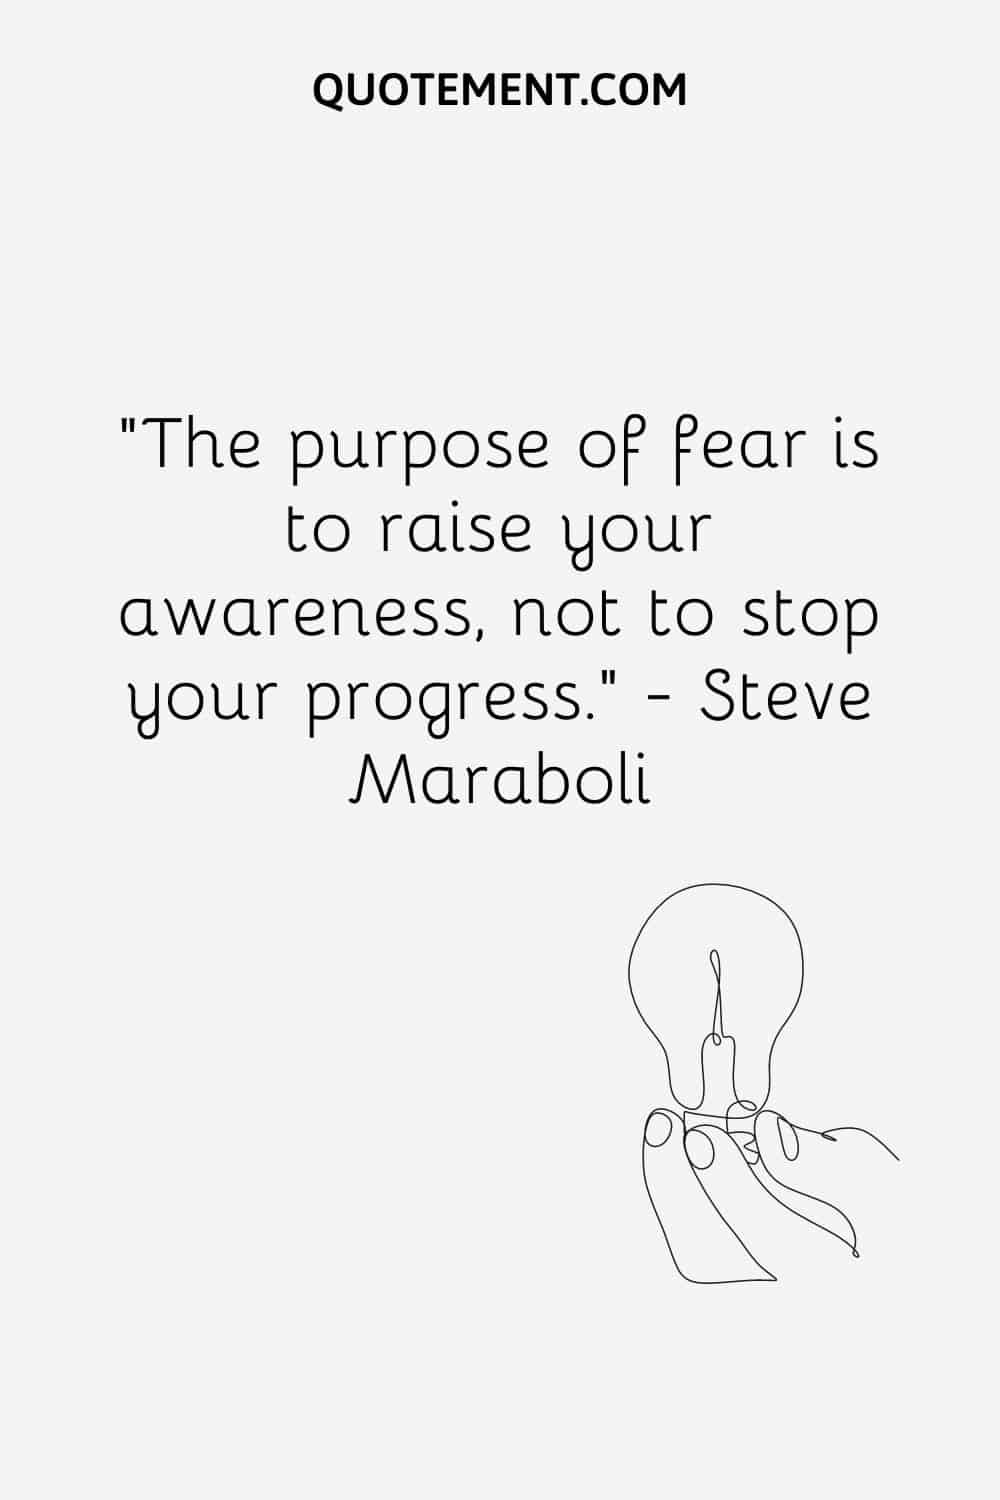 The purpose of fear is to raise your awareness